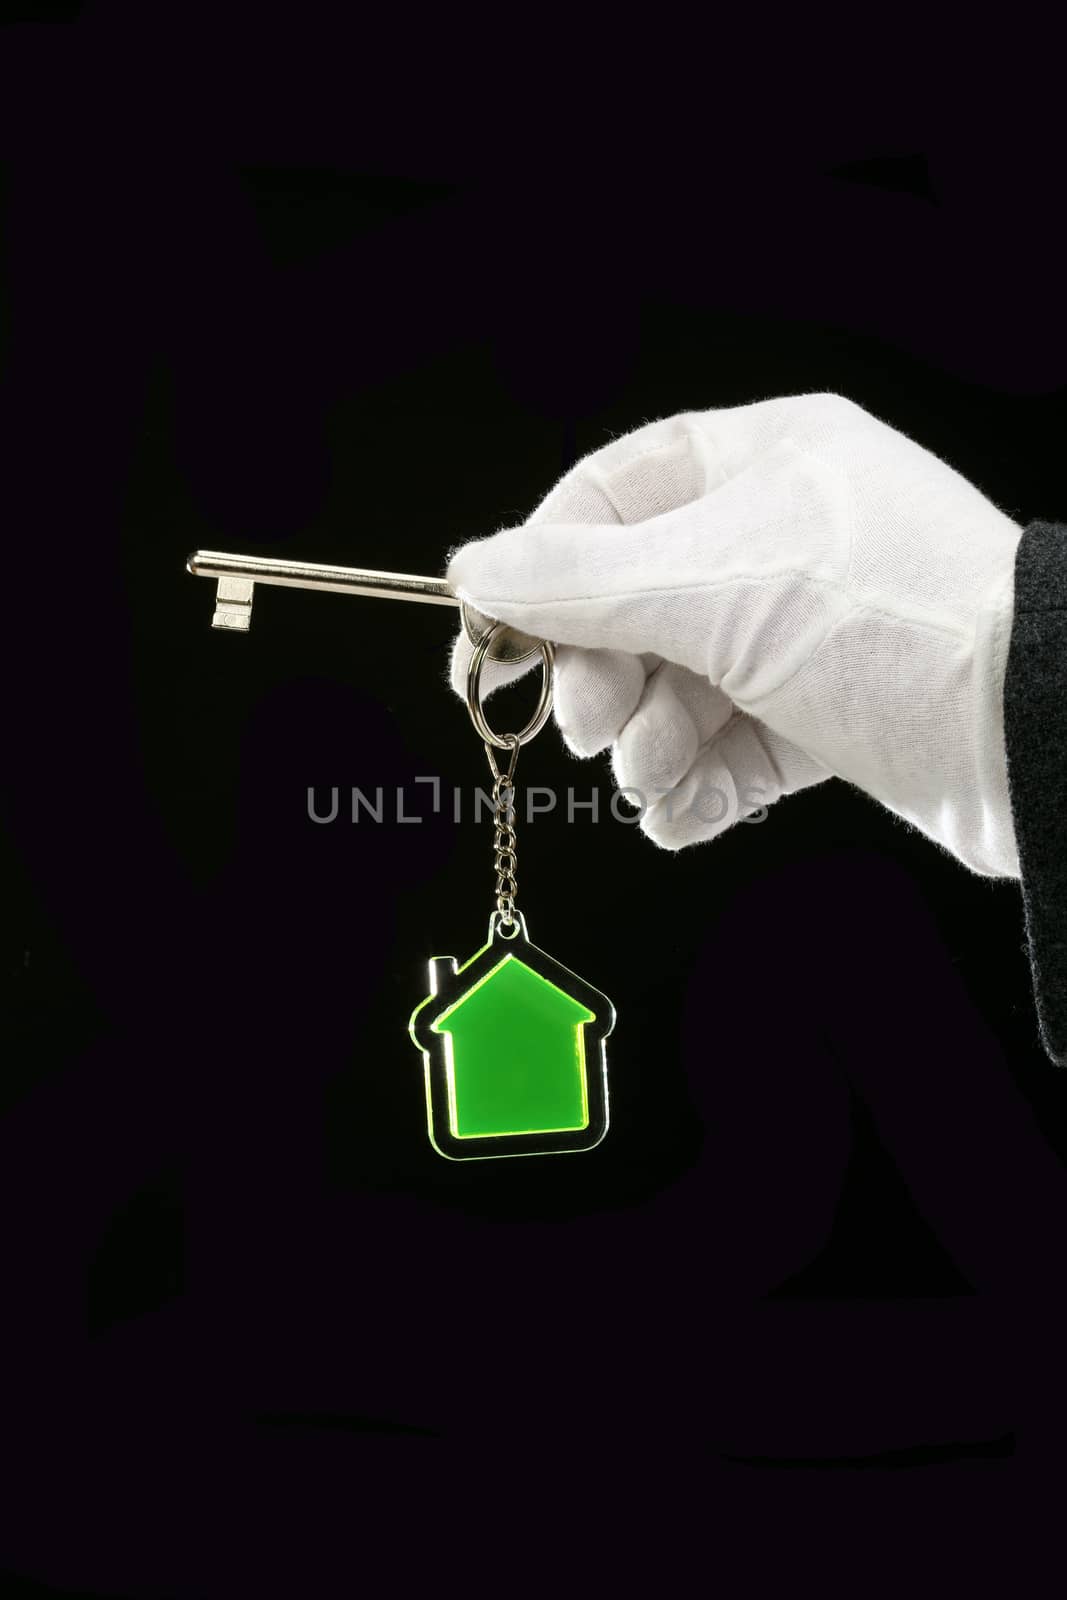 key and transparent key chain in the shape of House 